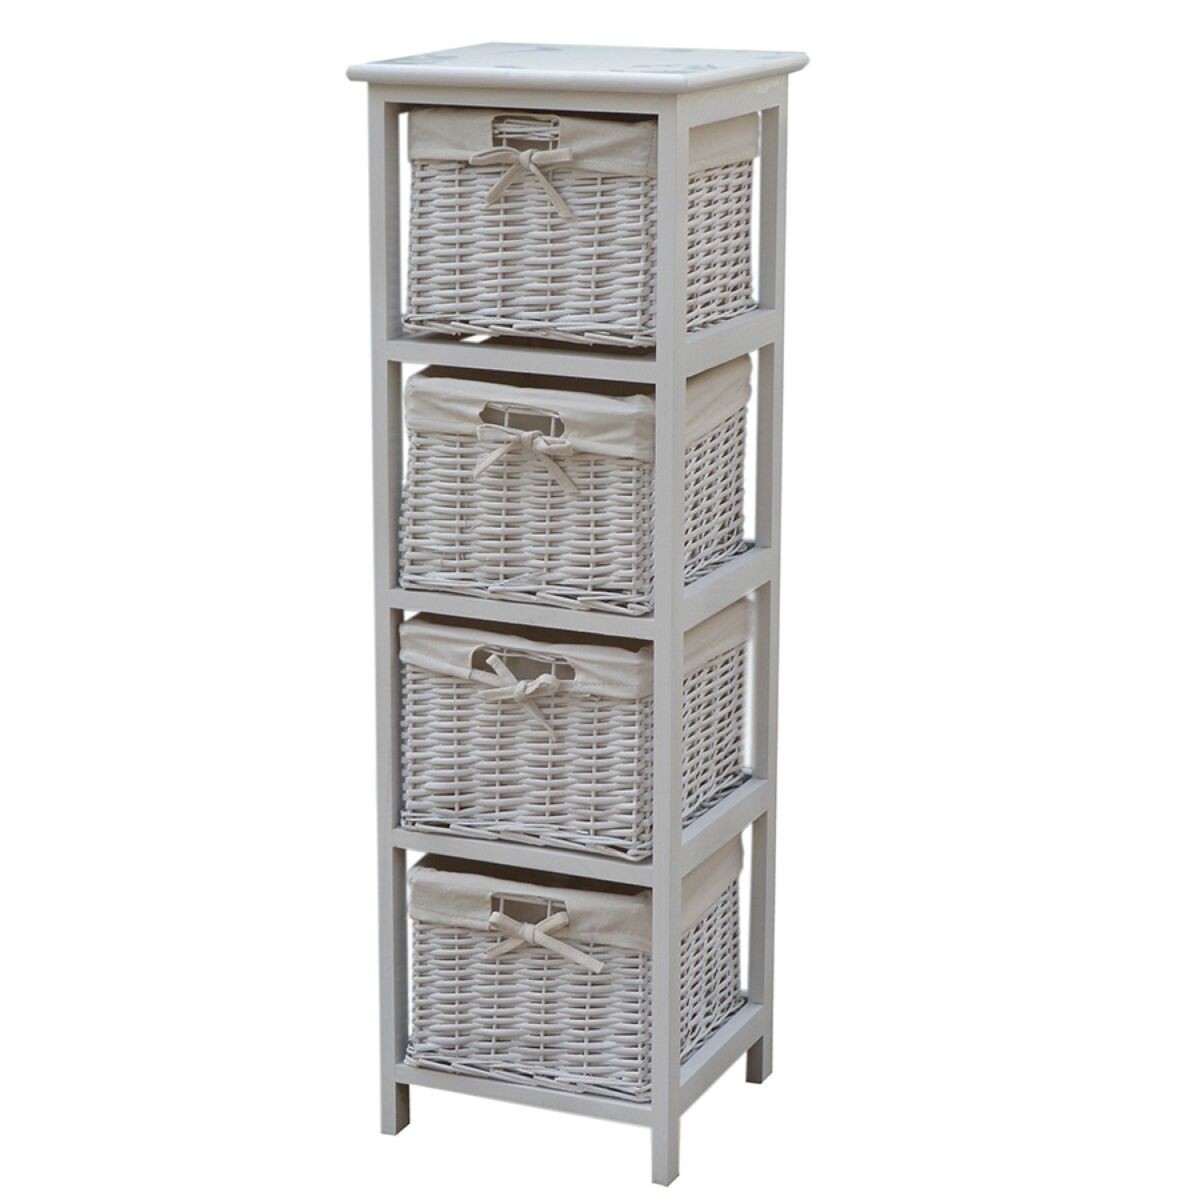 Charles bentley home wooden storage tower with 4 wicker